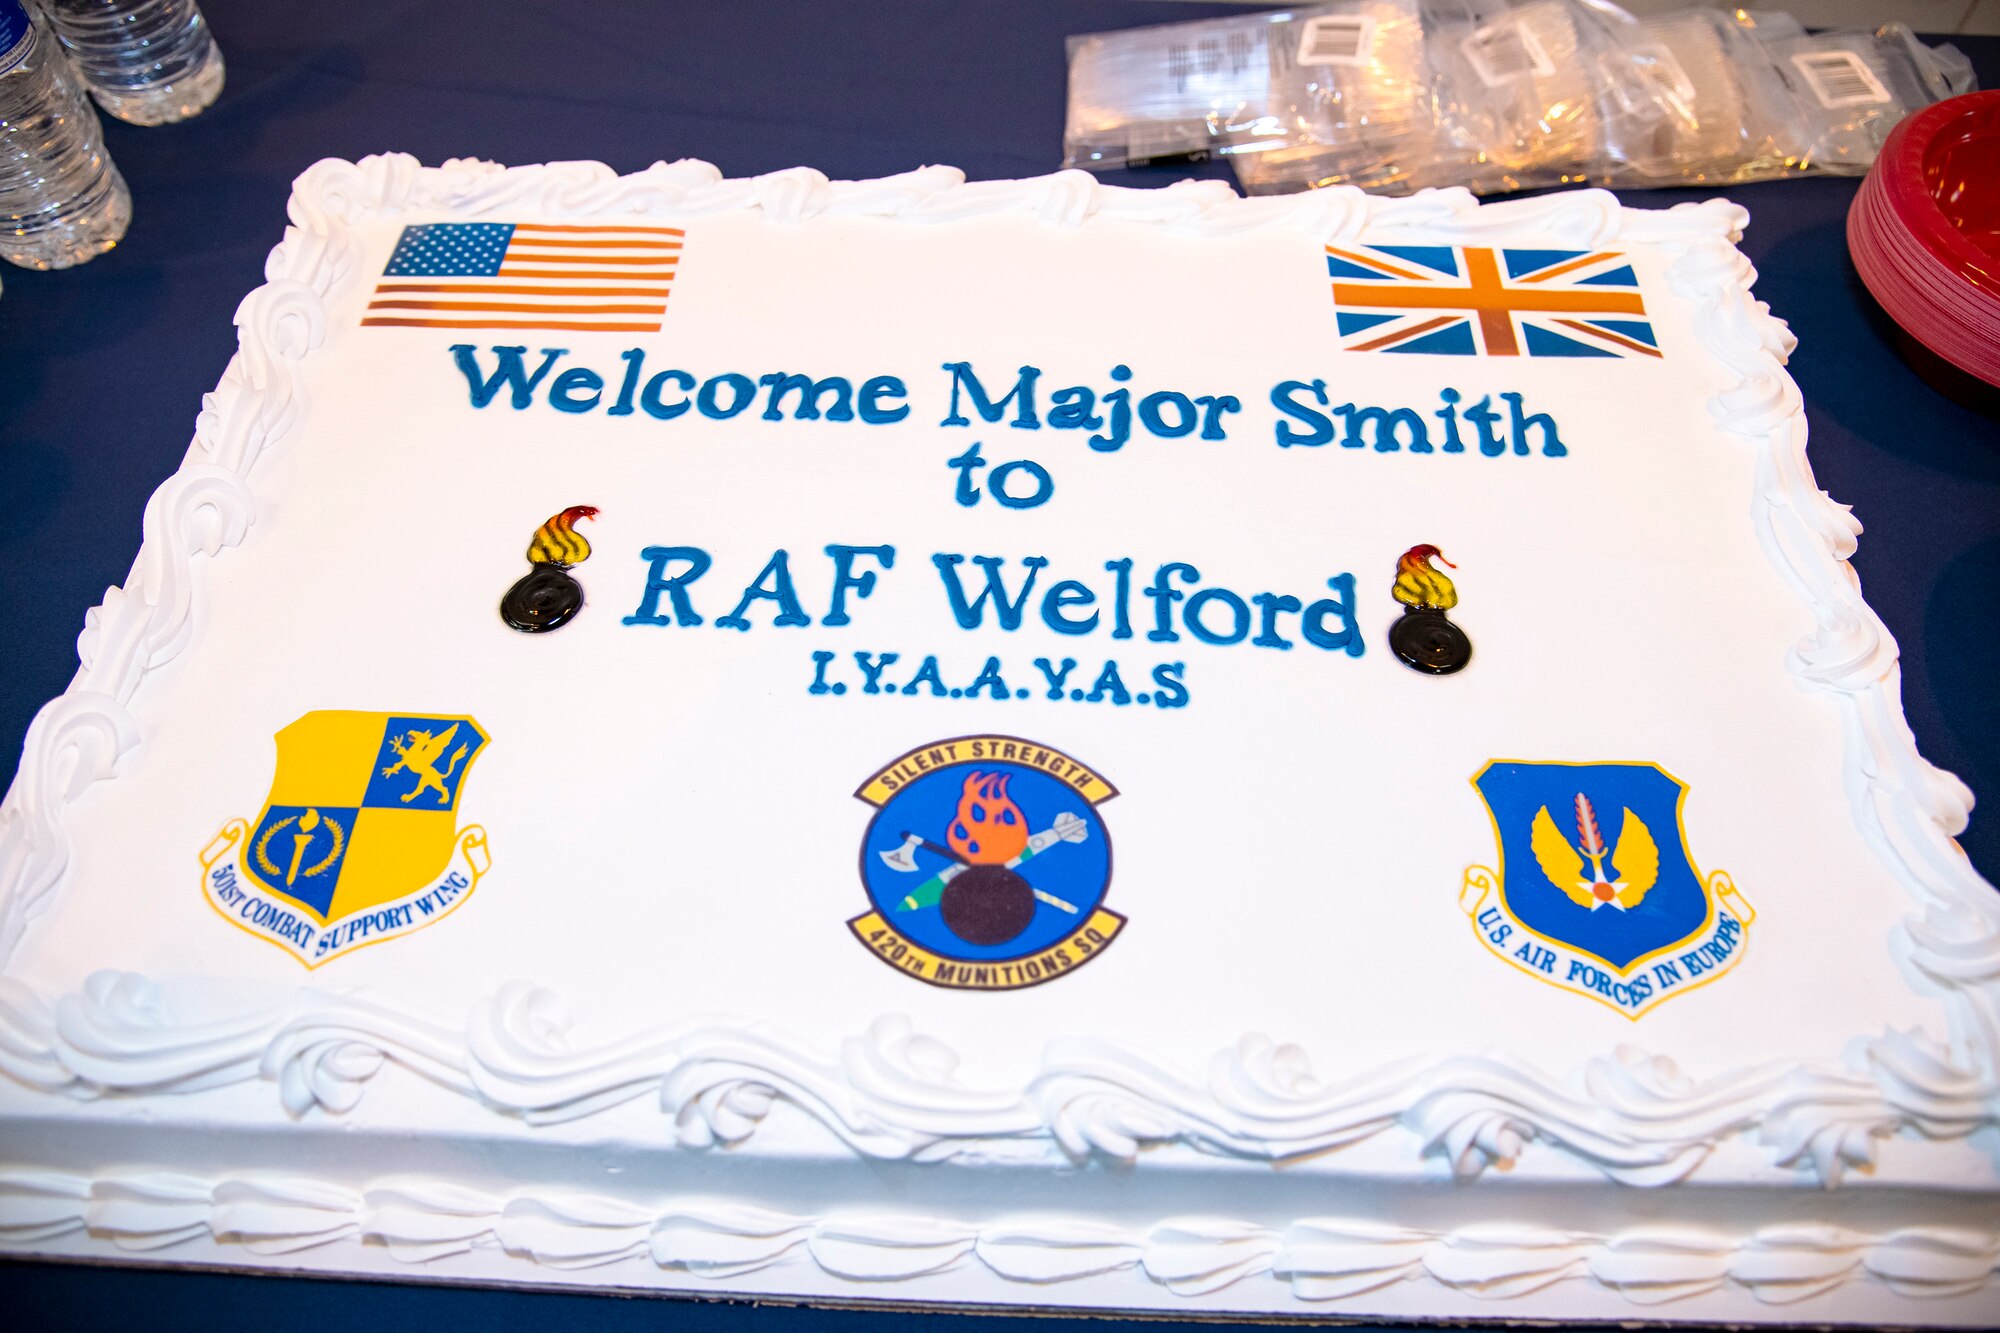 A cake welcoming Maj. Preston Smith, 420th Munitions Squadron incoming commander, rests on a table prior to a change of command ceremony at RAF Welford, England, May 26, 2022. Prior to assuming command of the 420th MUNS, Smith served as the director of operations for the 509th Maintenance Squadron, Whiteman Air Force Base, Missouri. (U.S. Air Force photo by Staff Sgt. Eugene Oliver)